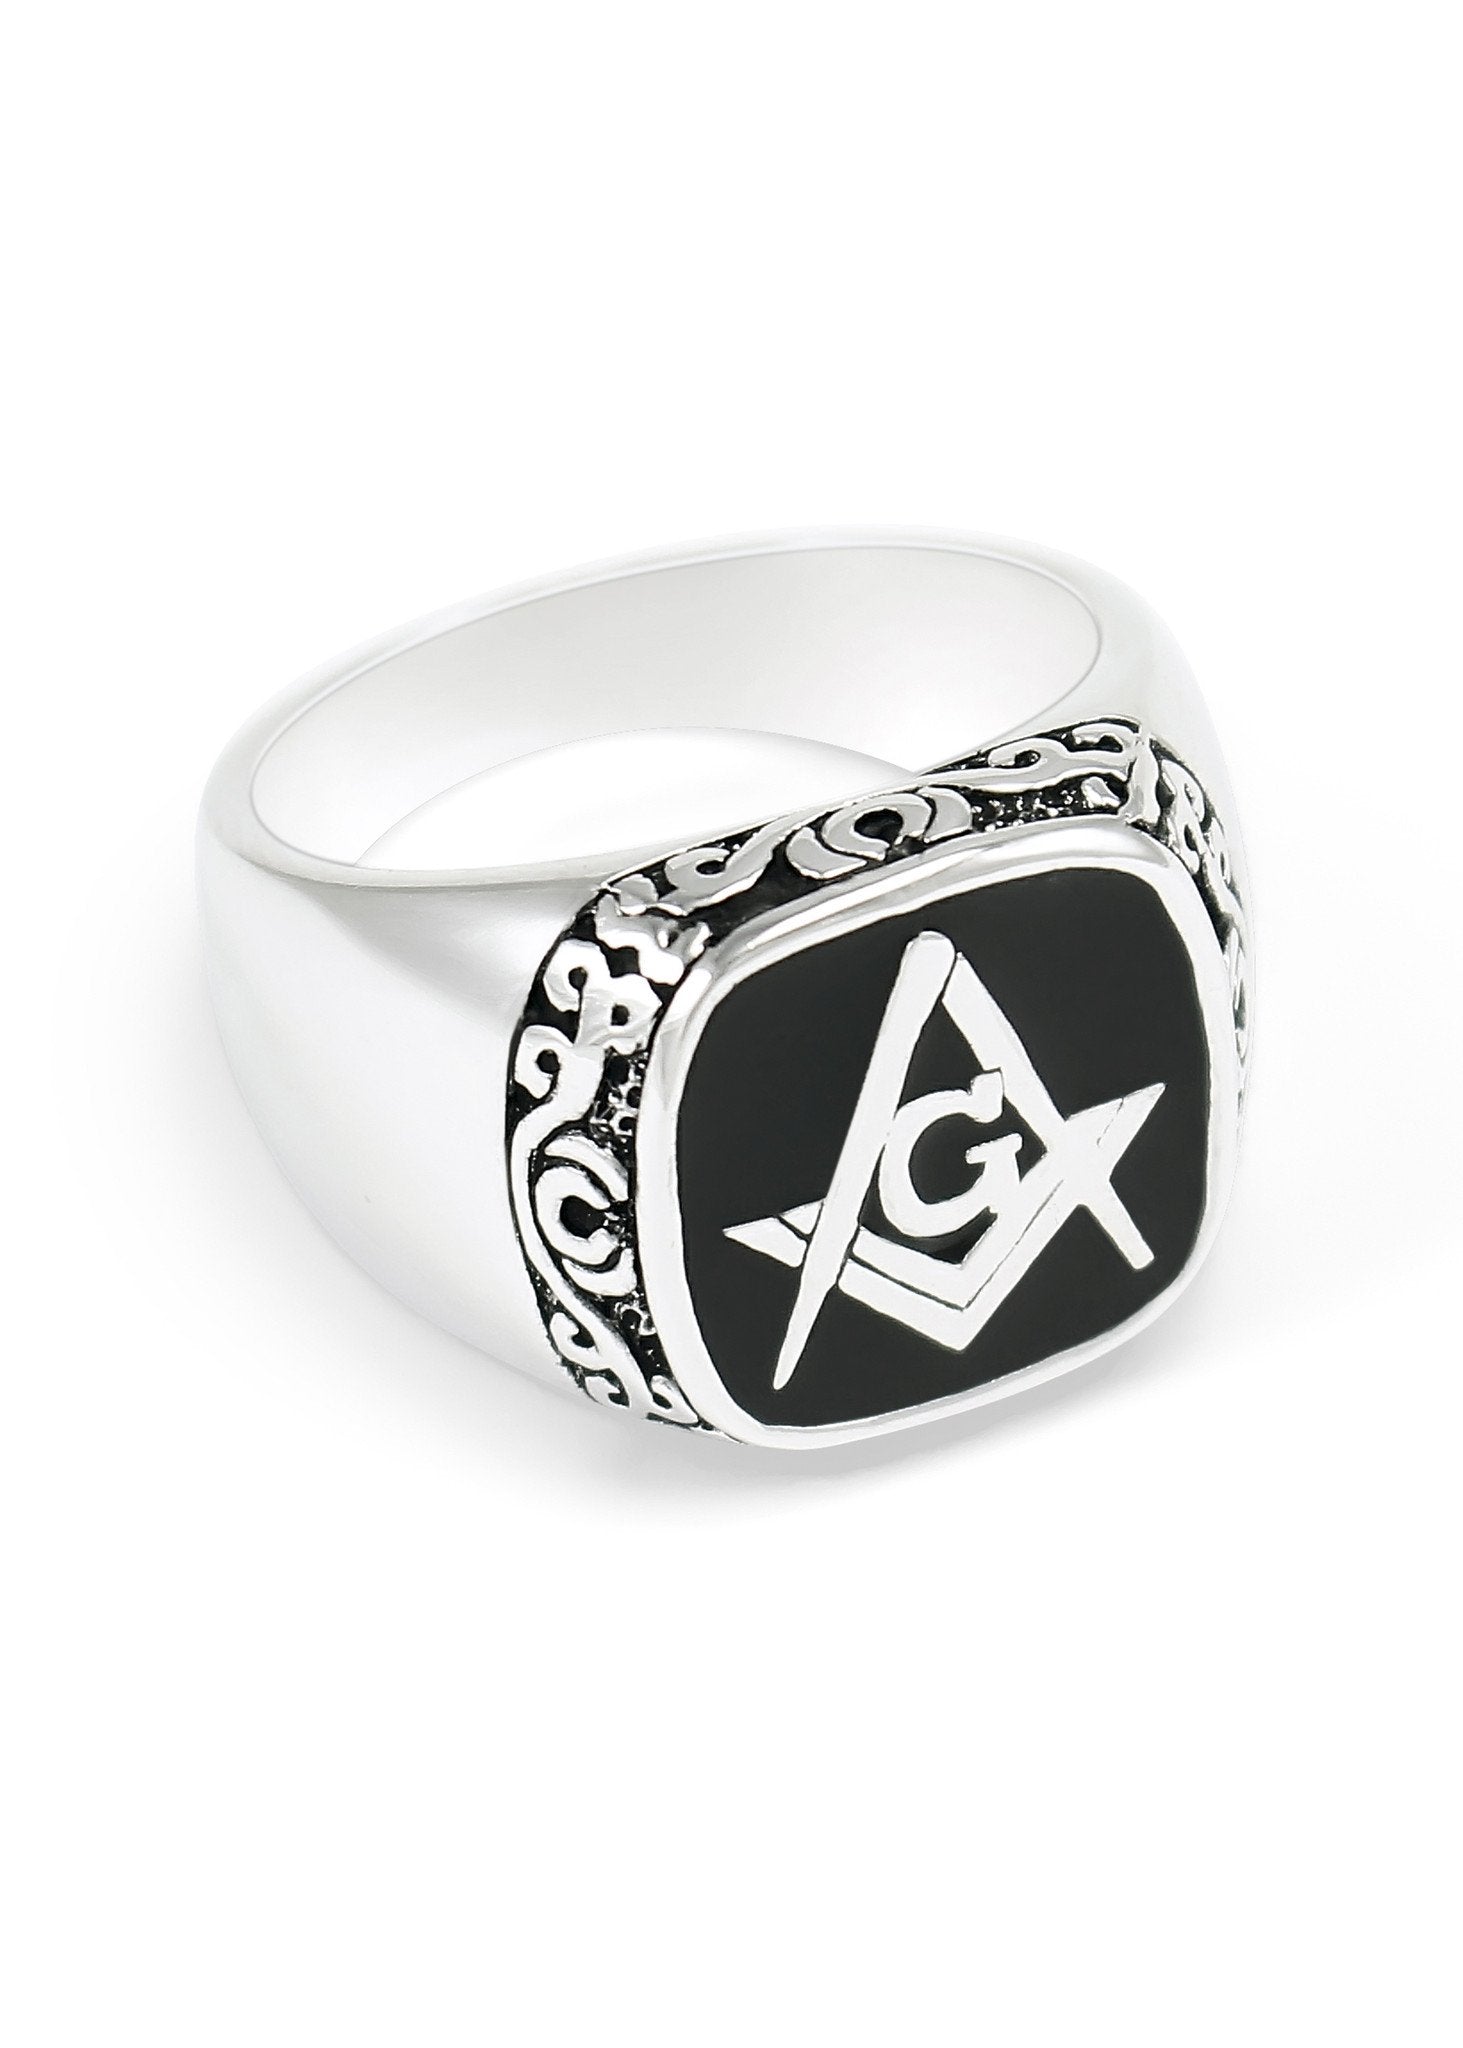 Solid Gold Square And Compass Masonic Men's Ring | Takar Jewelry